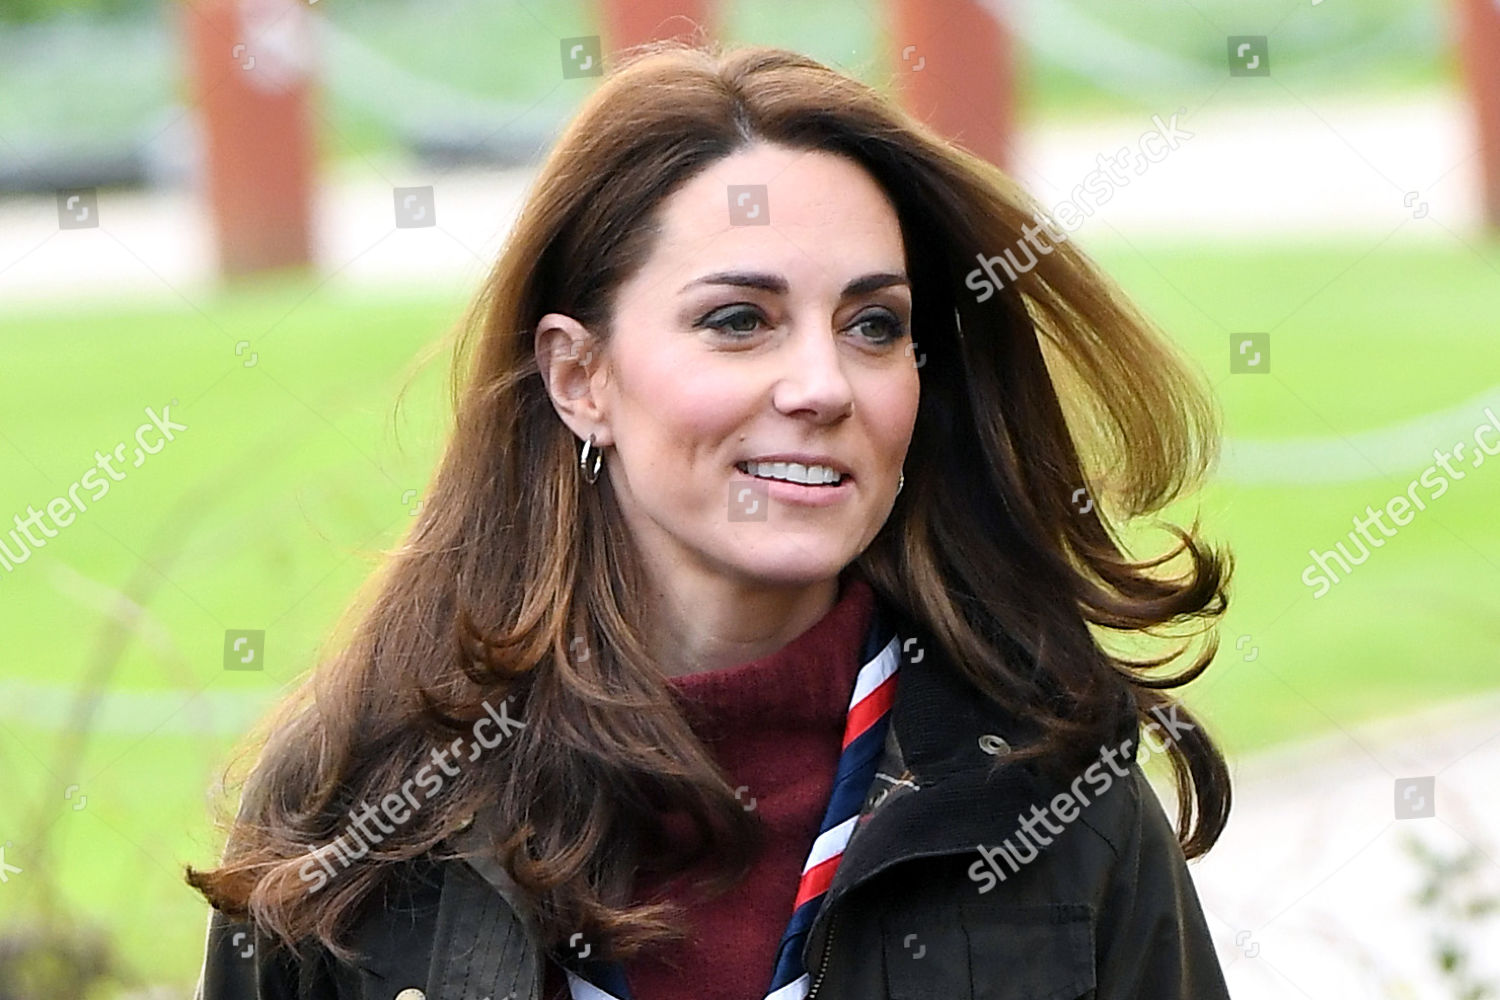 catherine-duchess-of-cambridge-visit-to-the-scouts-gilwell-park-essex-uk-shutterstock-editorial-10179979ai.jpg